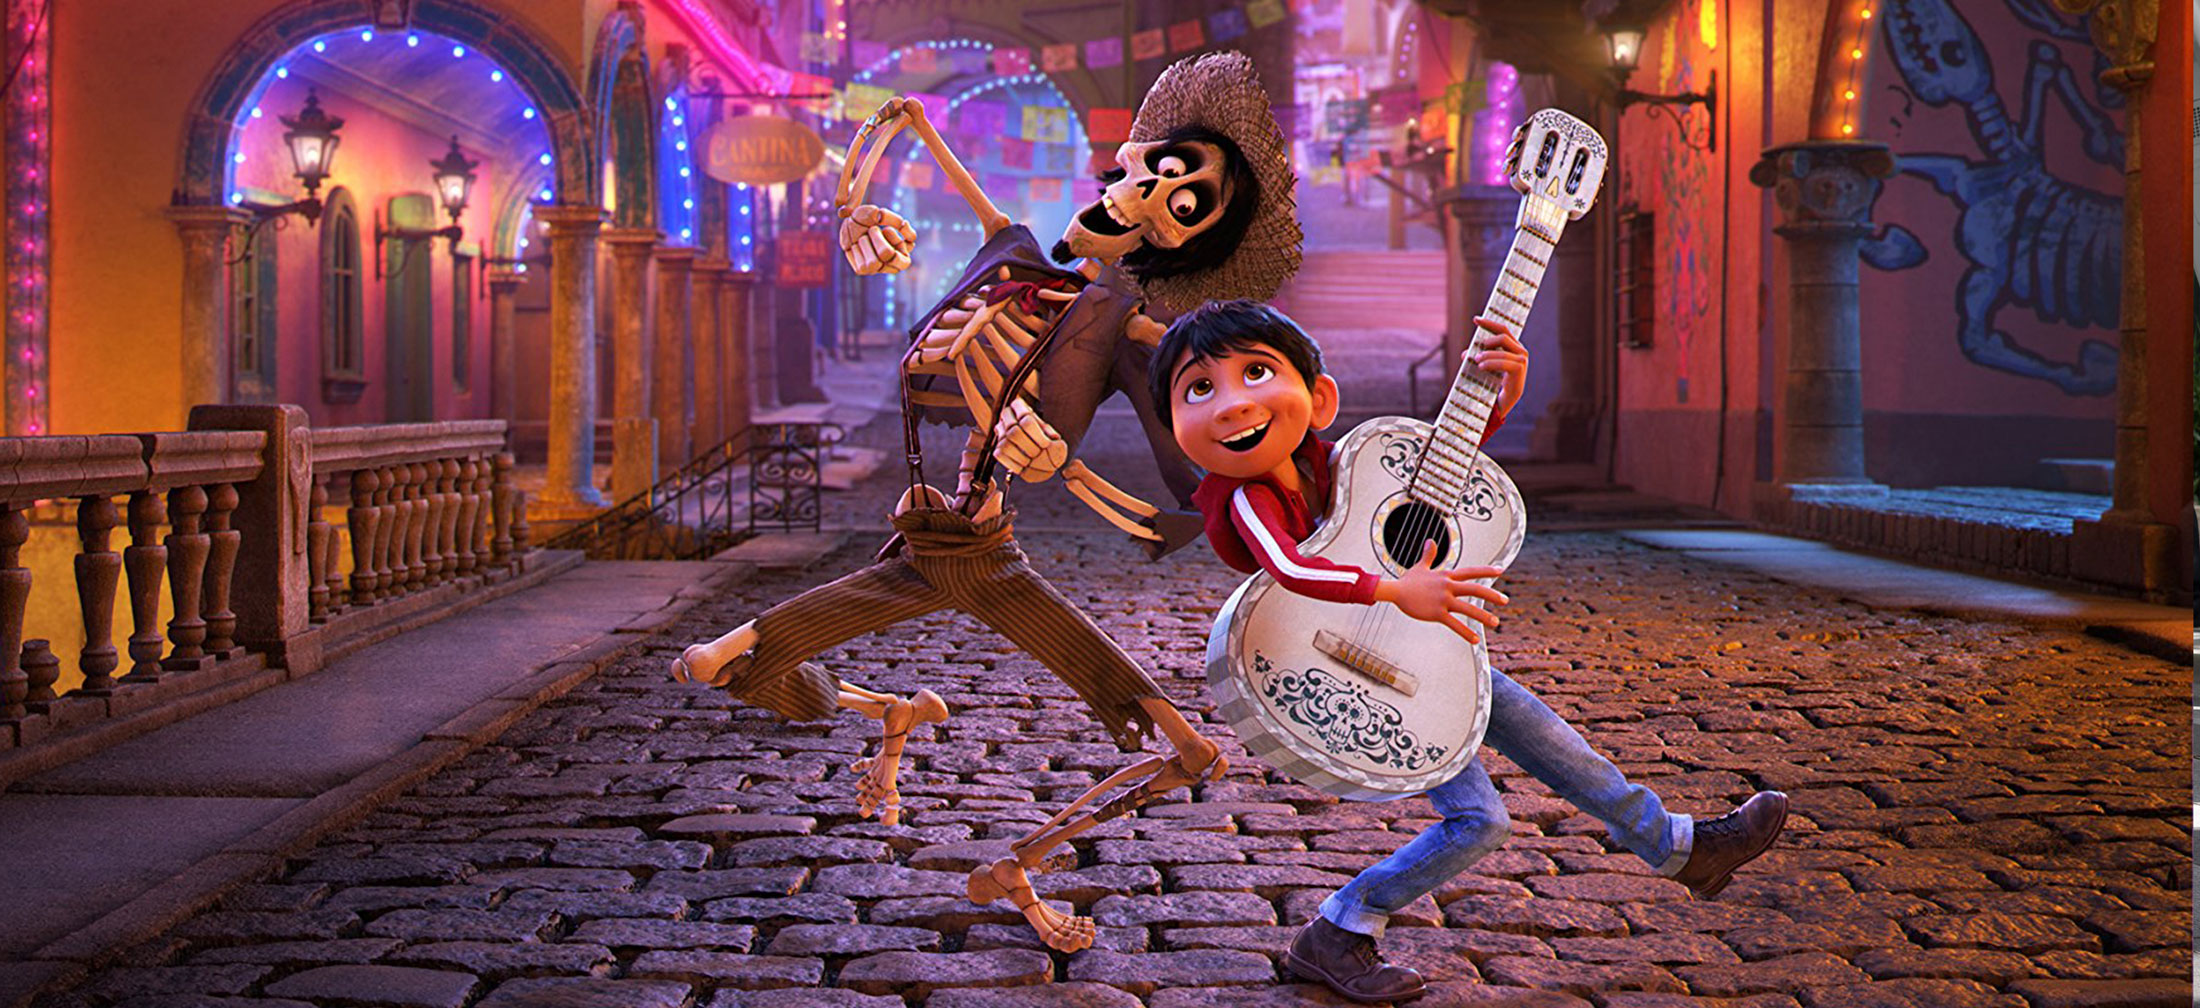 Movies On The Lawn: Coco